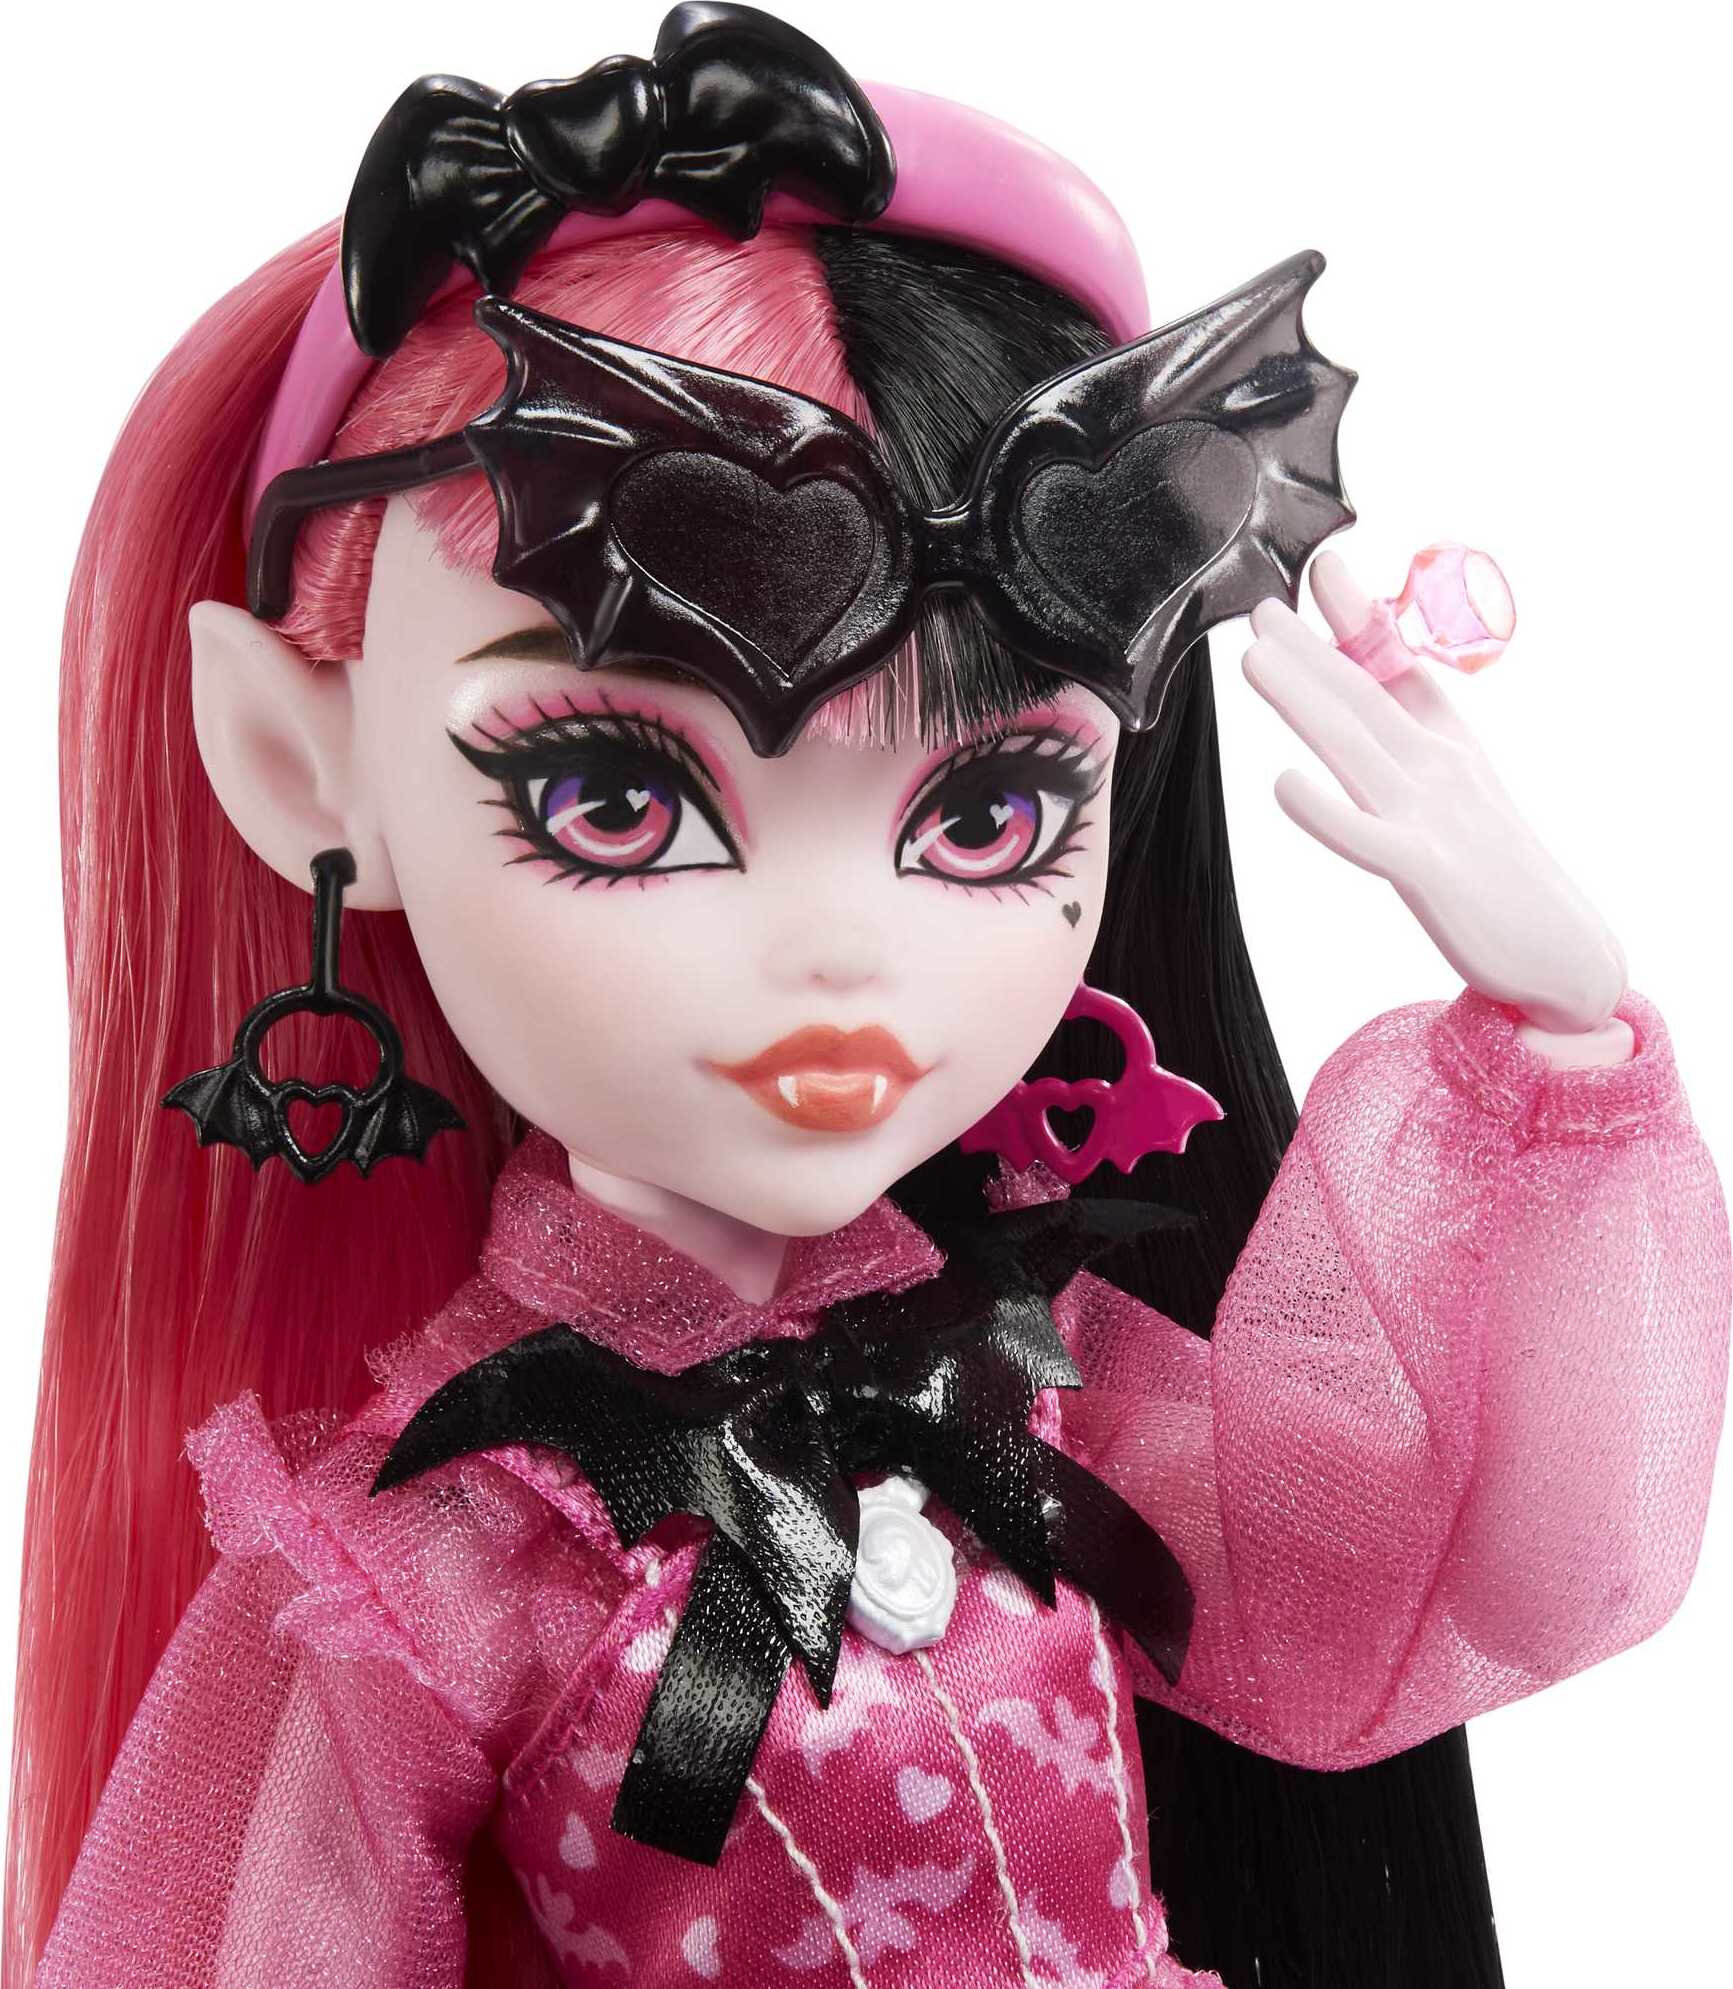 Monster High Draculaura Fashion Doll with Pink & Black Hair, Accessories & Pet Bat - image 5 of 7